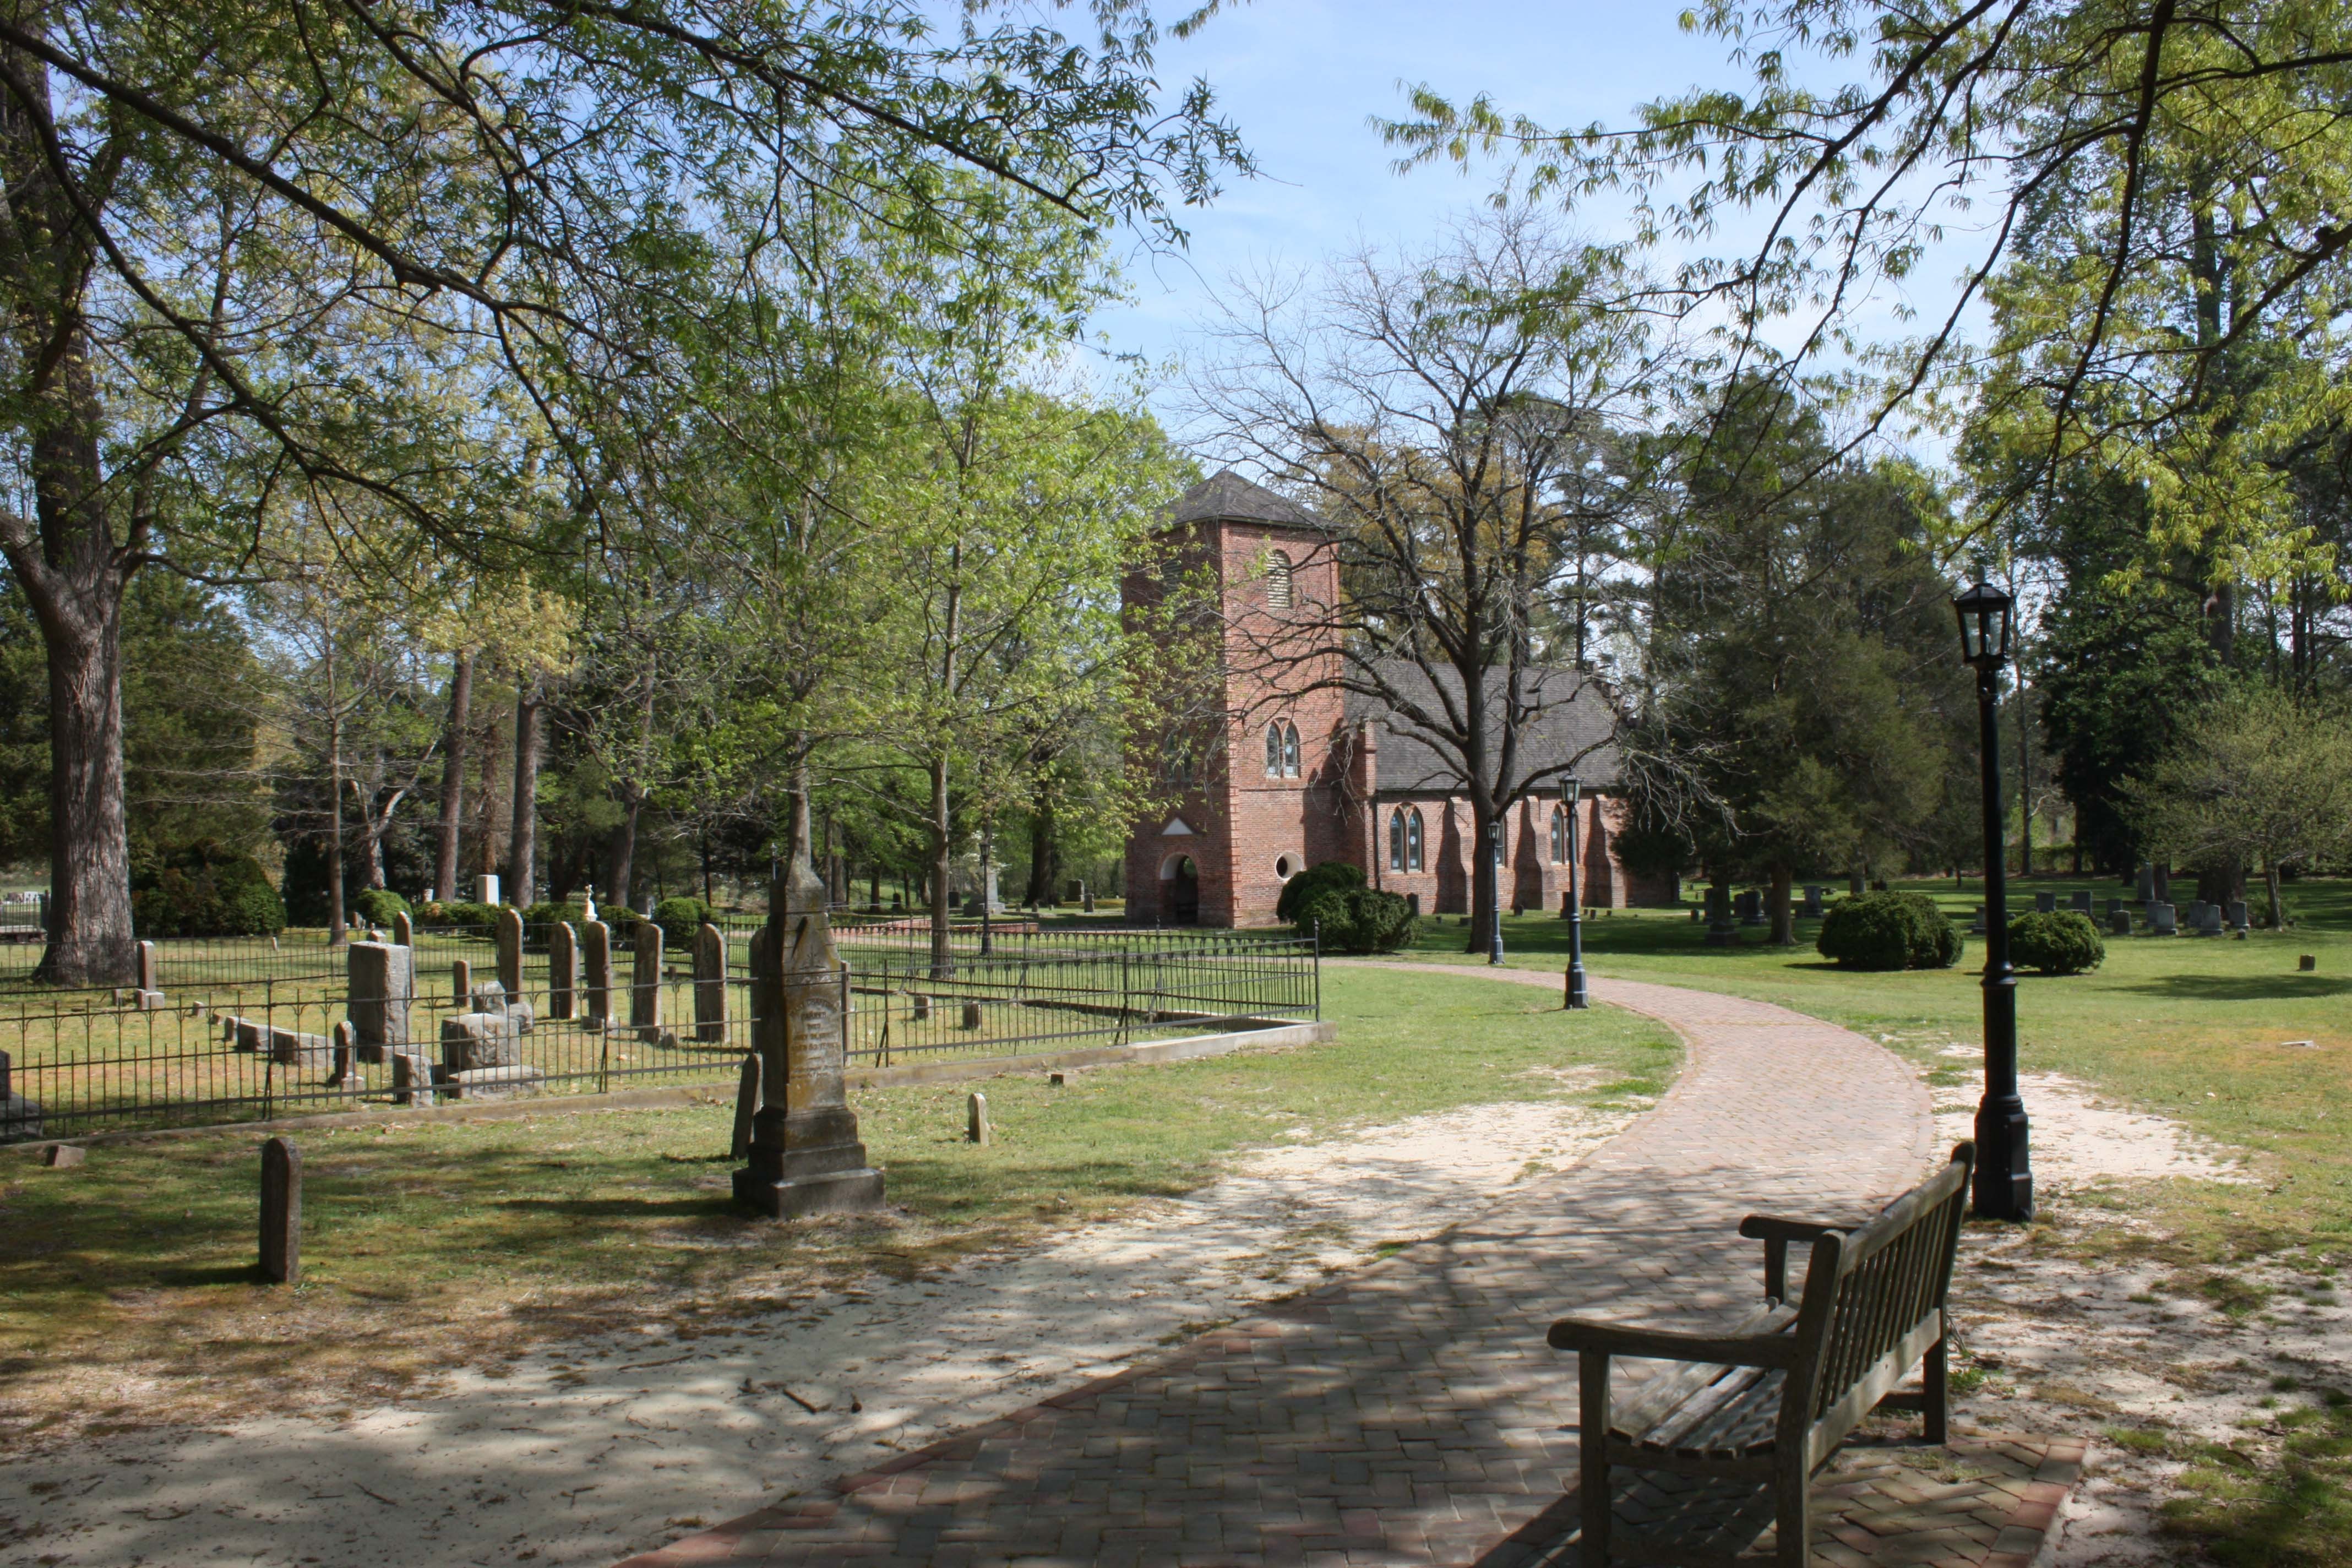 St. Luke's Historic Church and Museum in Virginia